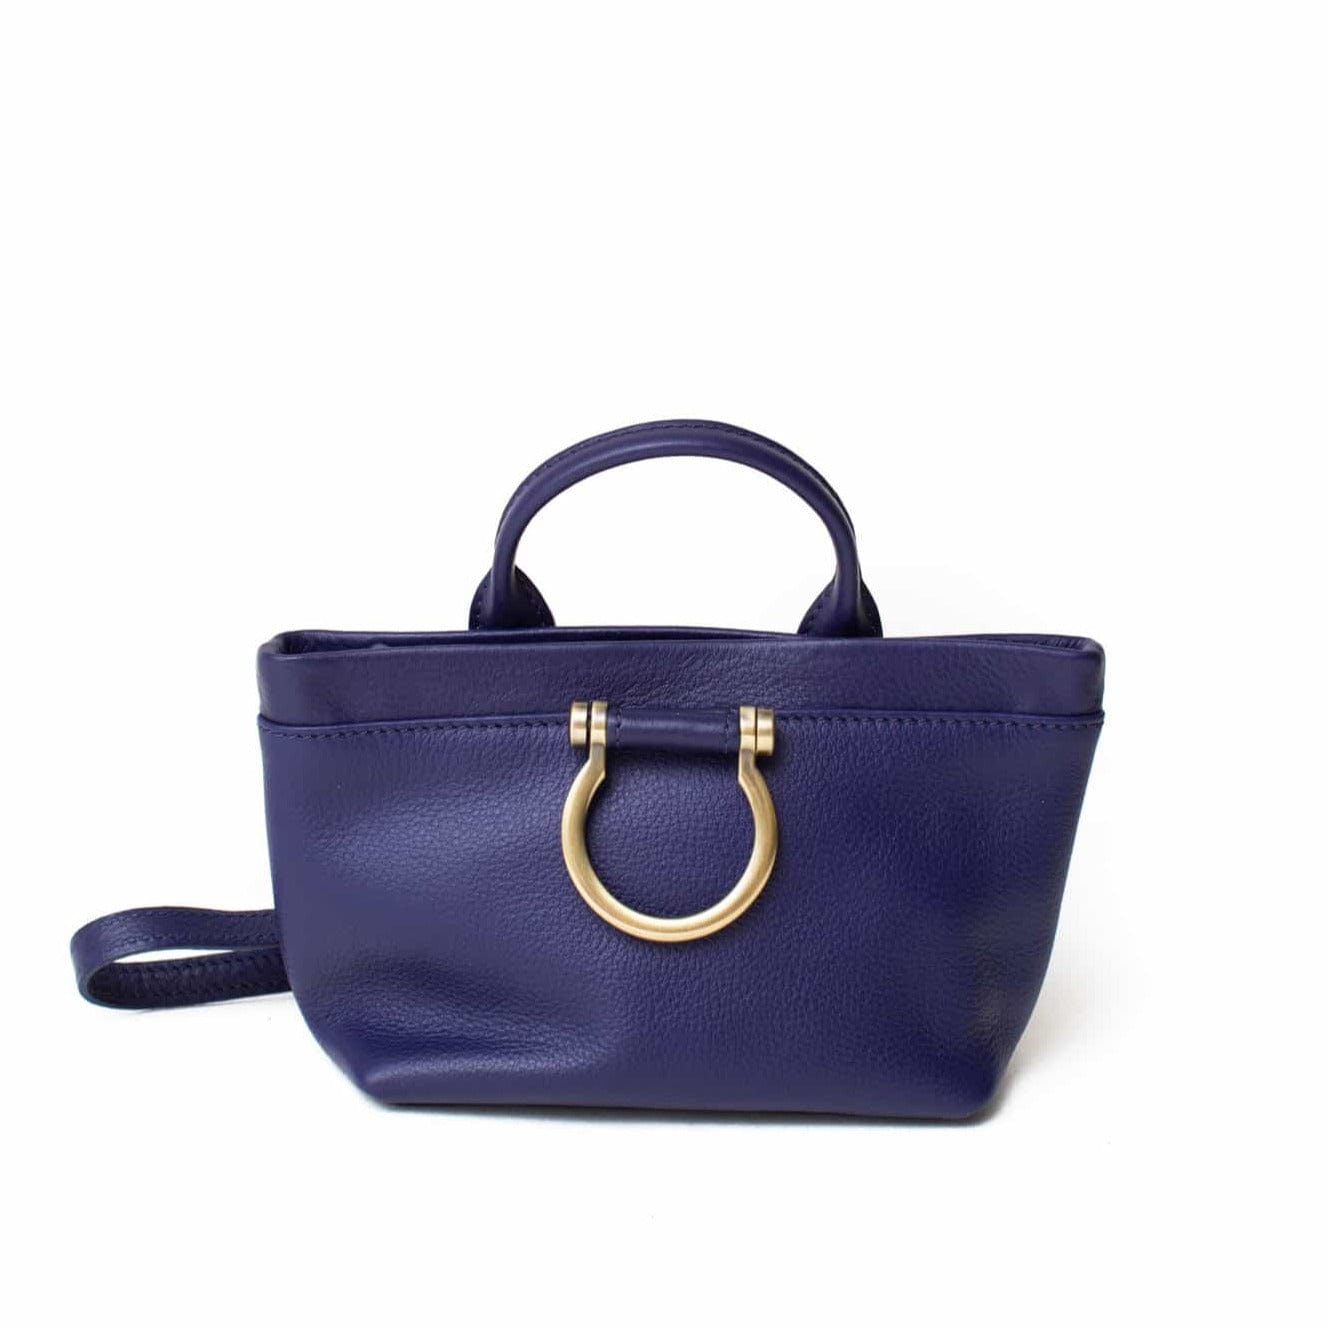 The Roger mini crossbody in admiral blue oil leather features a top handle and Omega plated brass hardware.